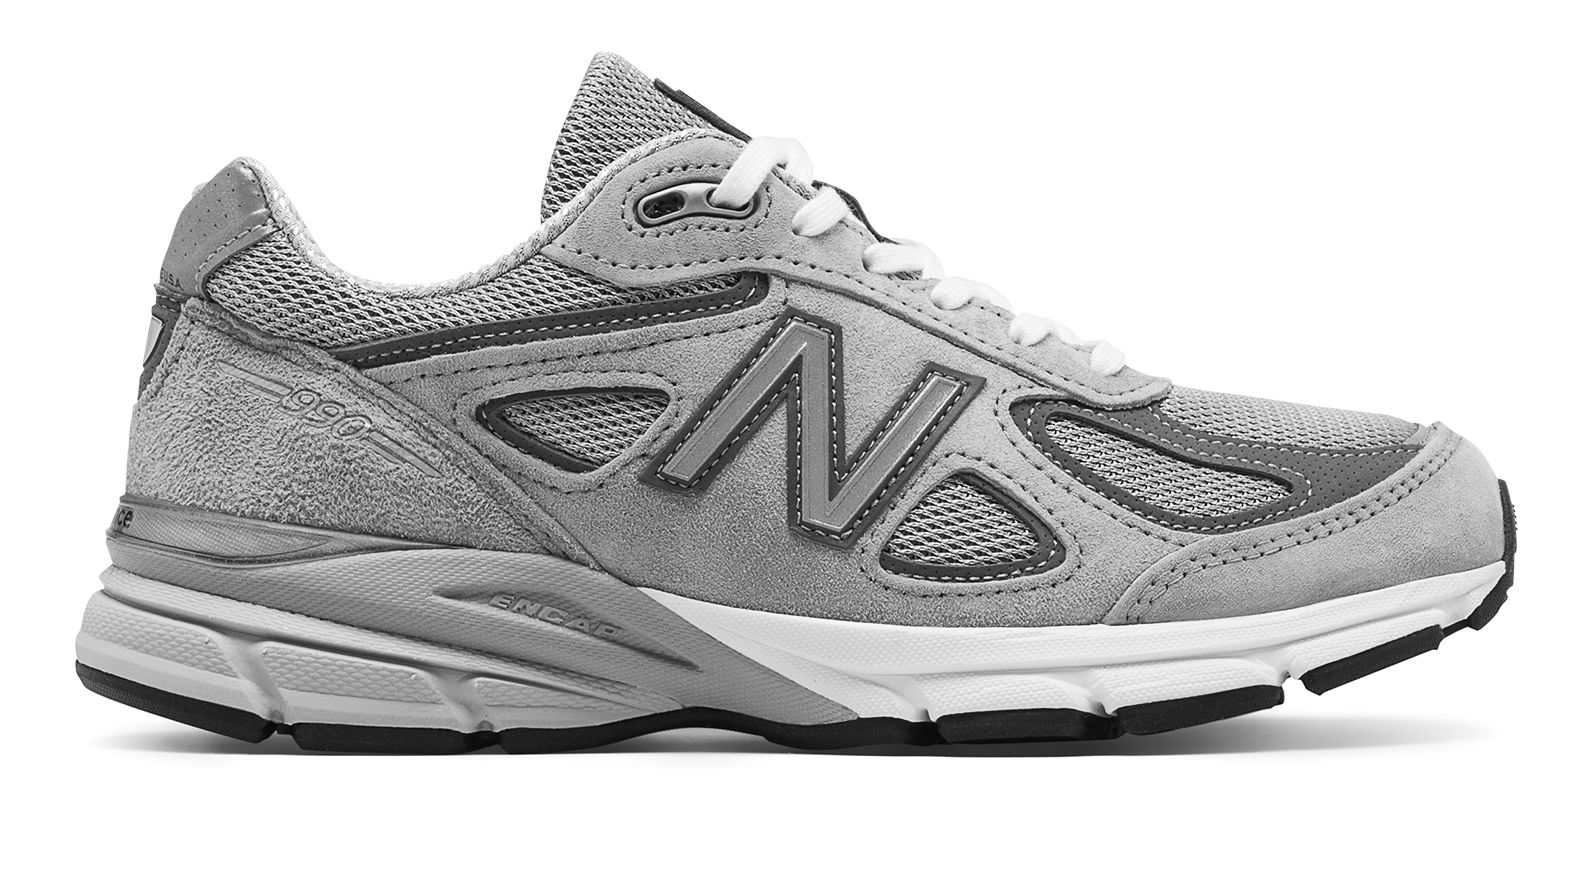 New Balance W990-V4 on Sale - Discounts Up to 51% Off on W990GL4 at Joe's New  Balance Outlet